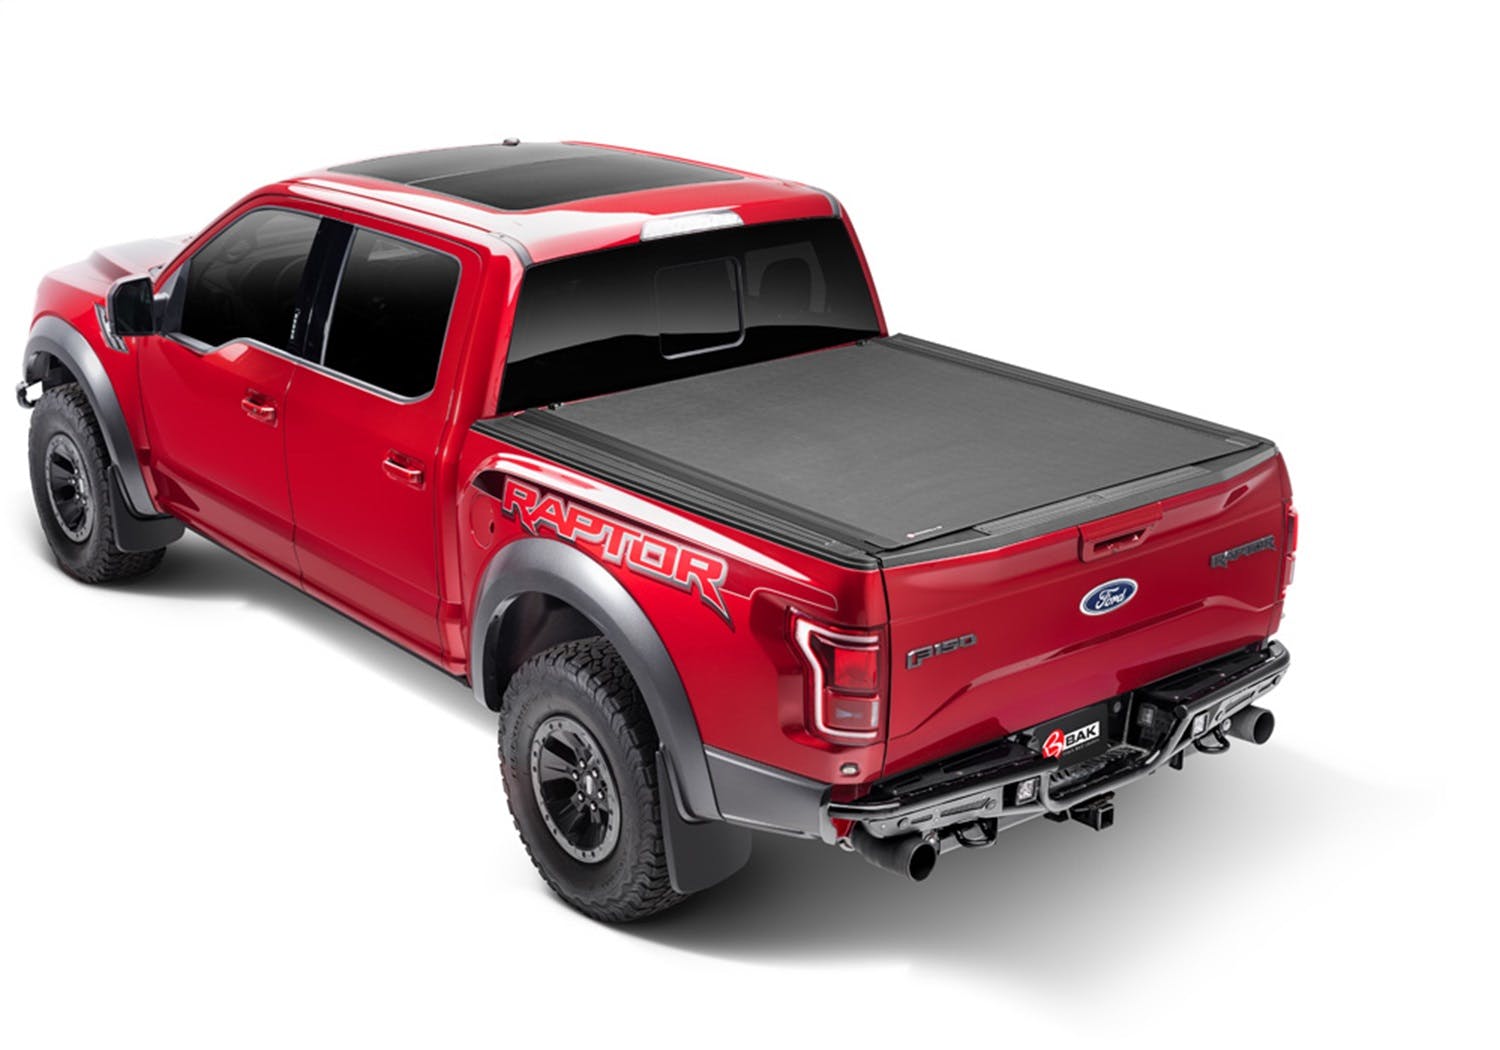 BAK Industries 80329 Revolver X4s Hard Rolling Truck Bed Cover